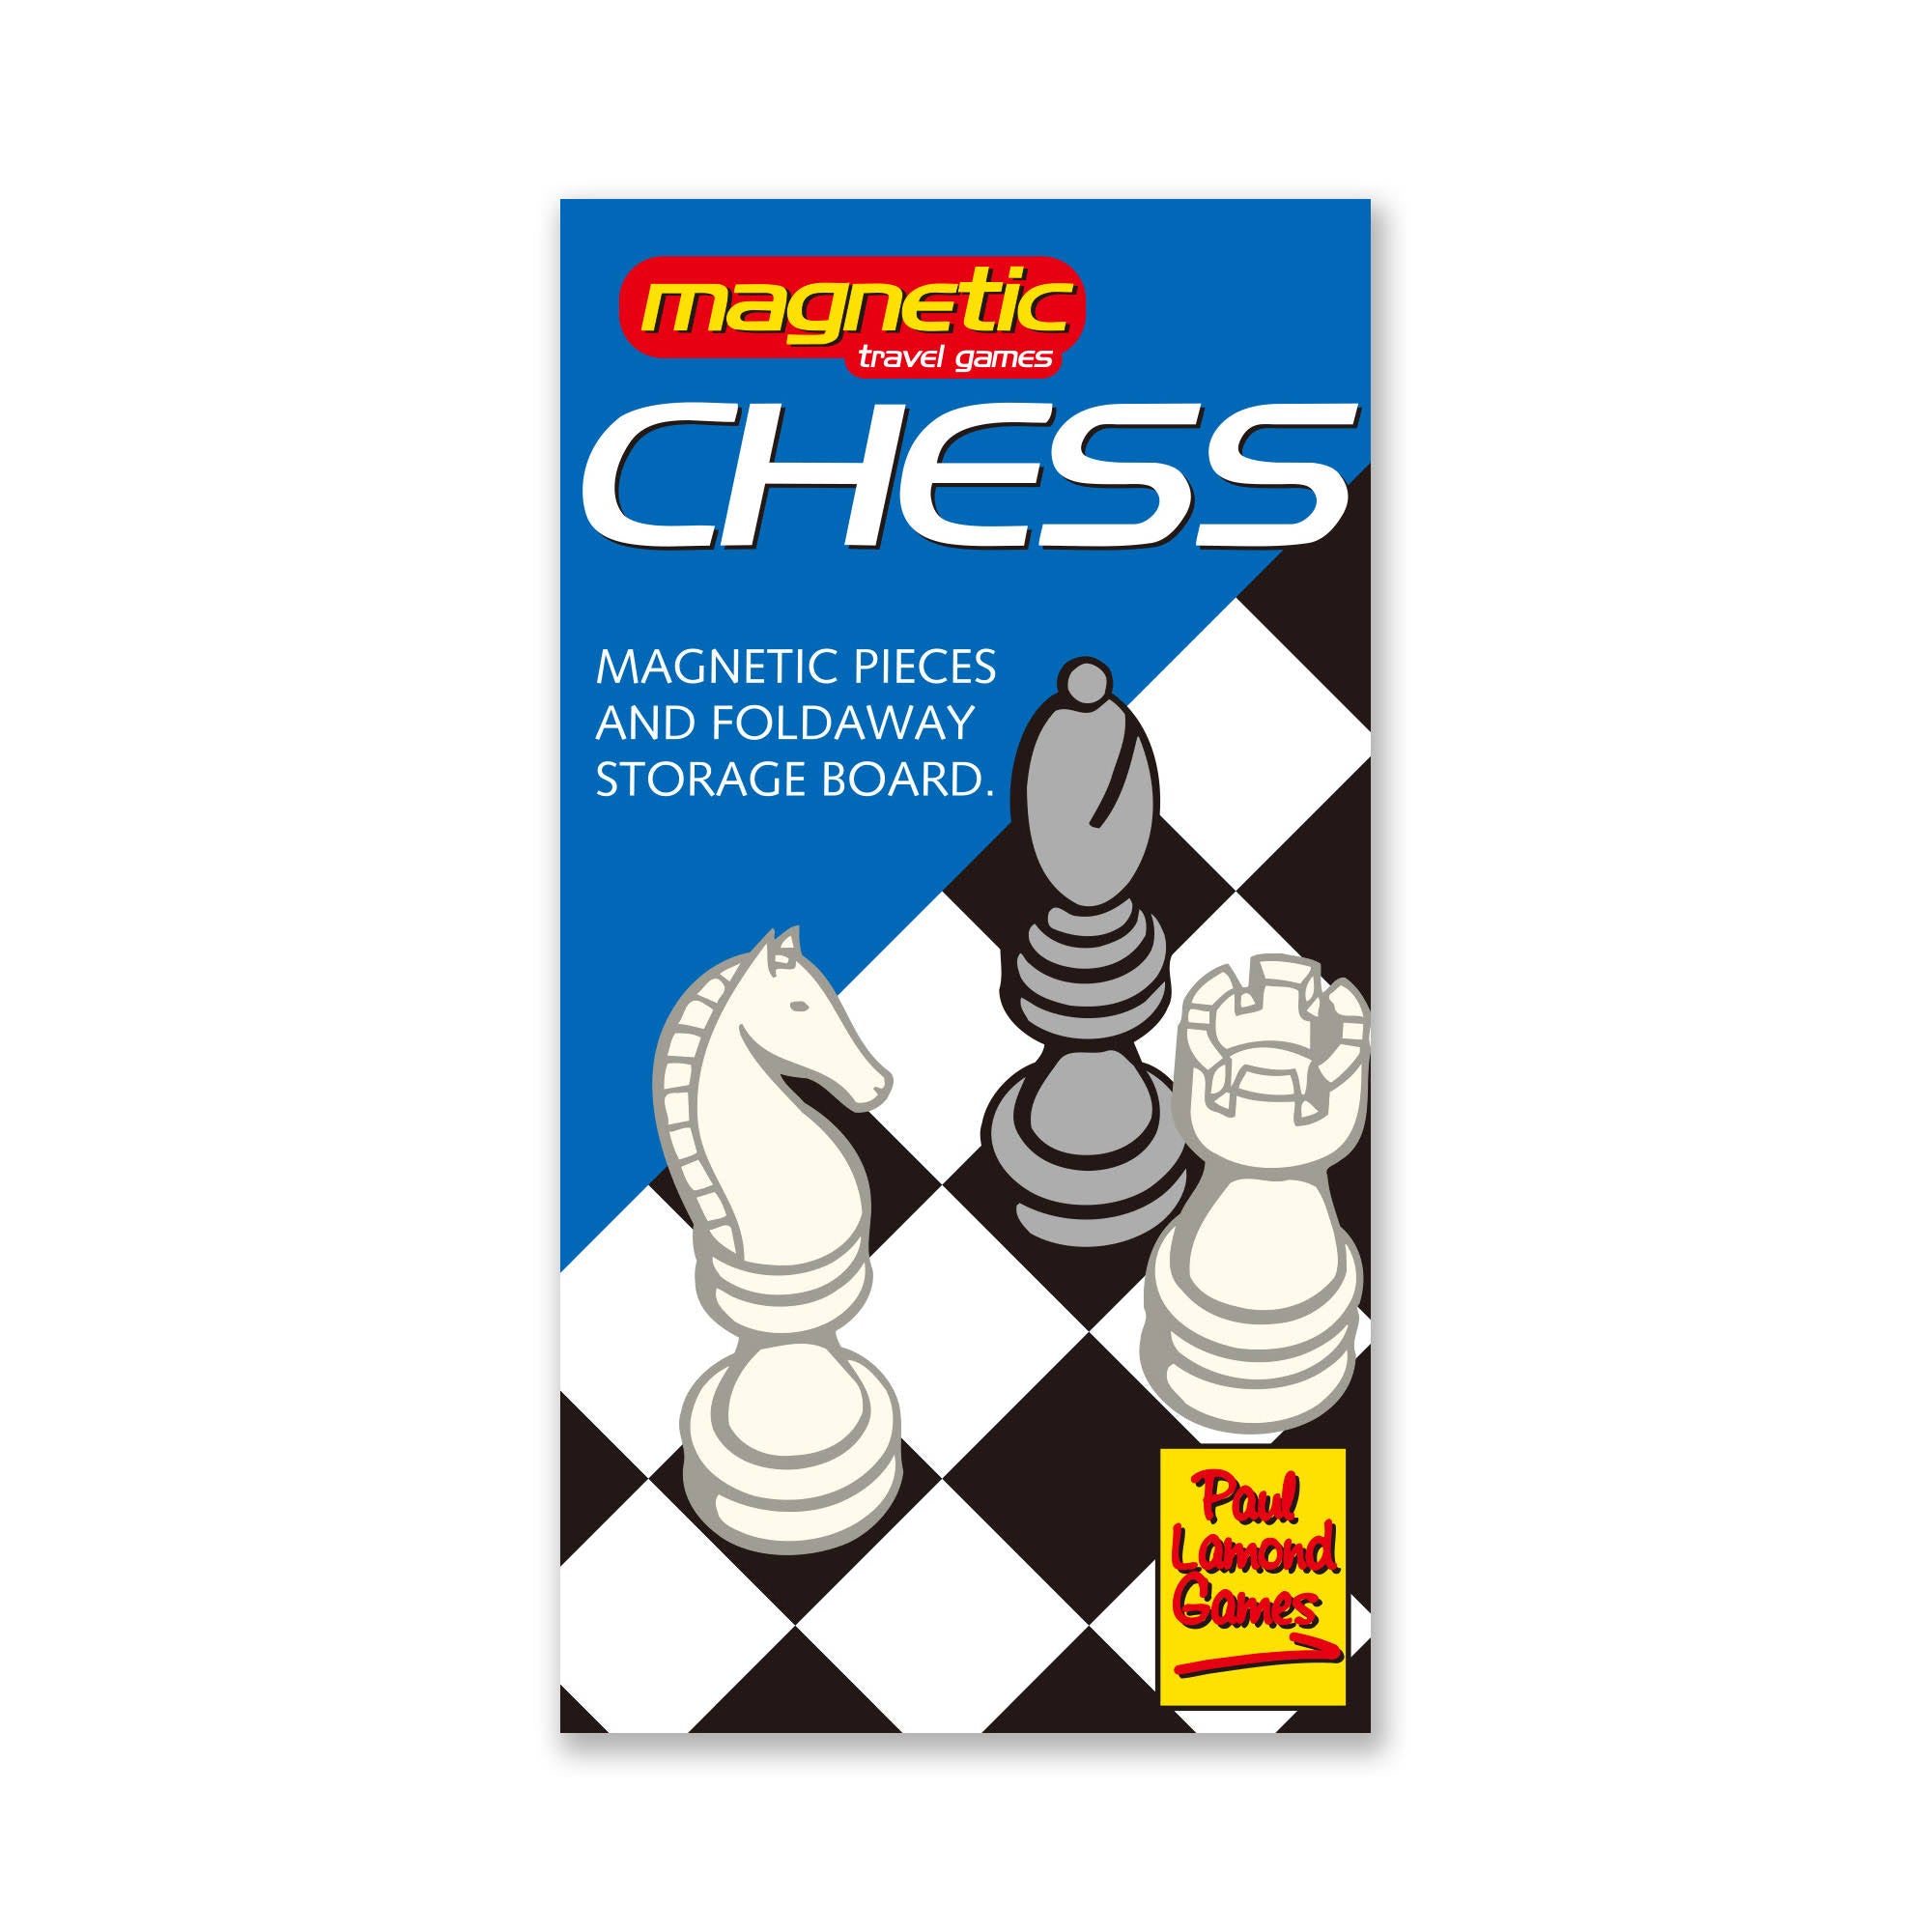 Magnetic Chess Travel Game